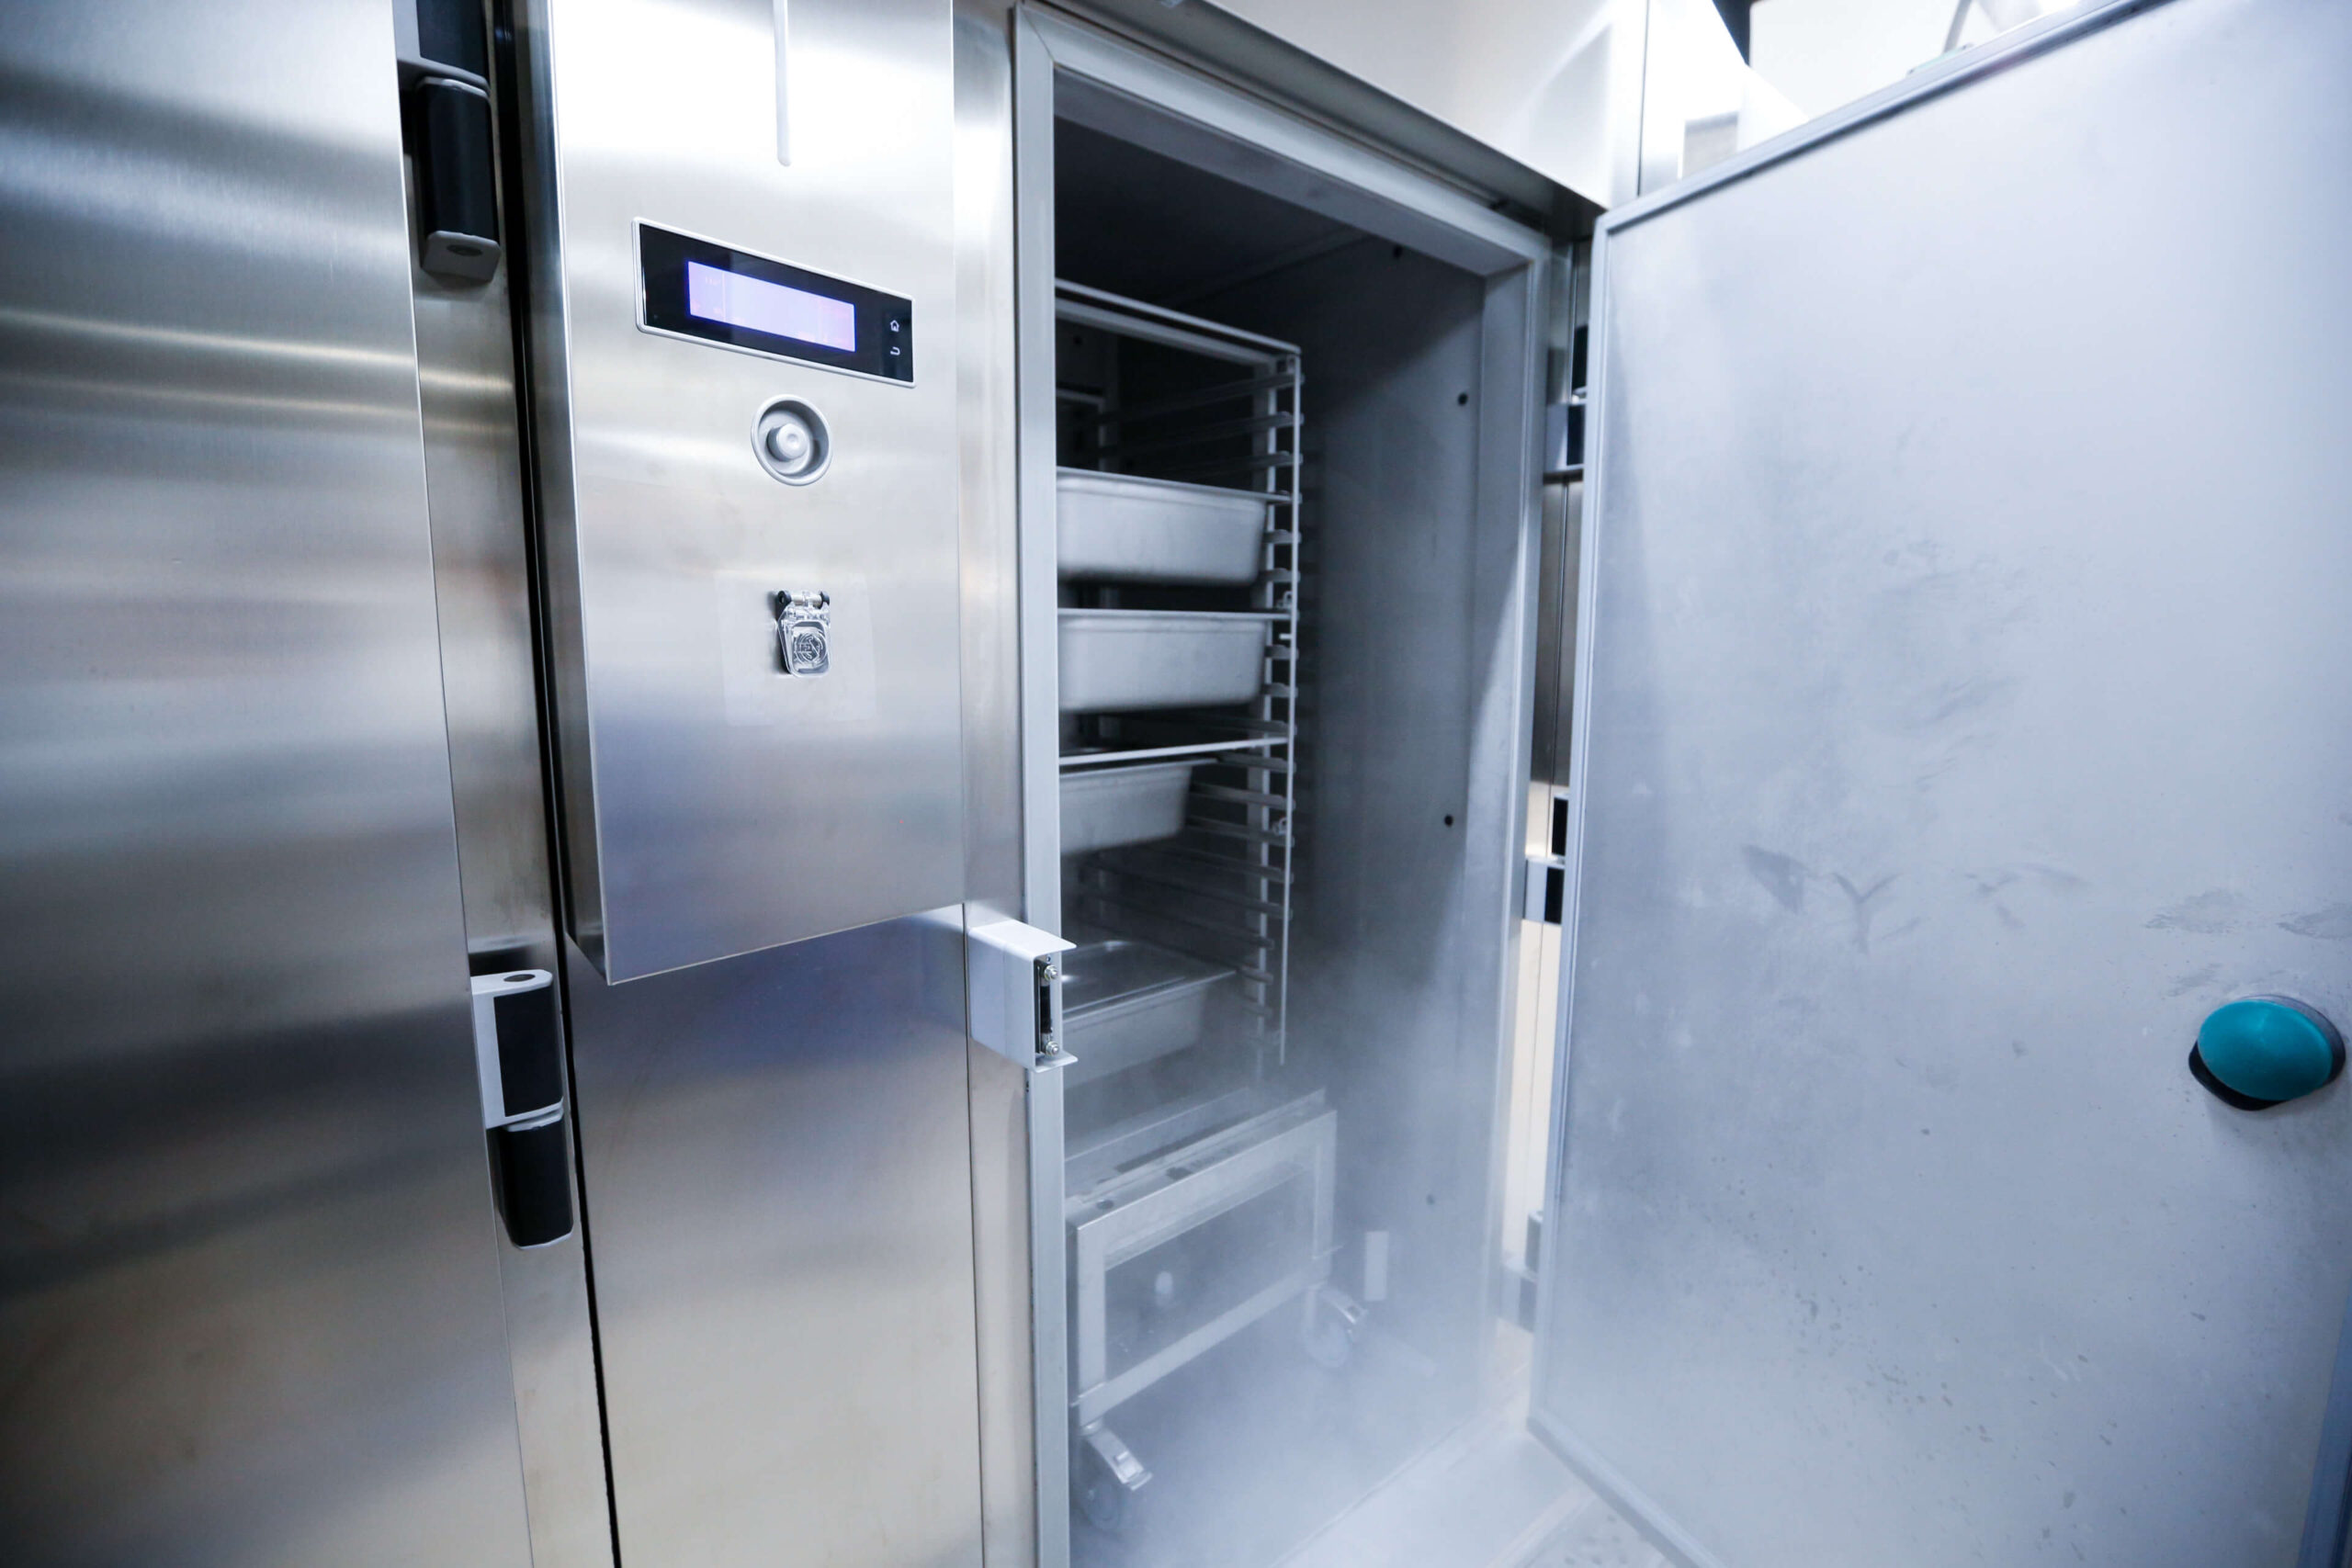 Remote Alarms for Ultra-Low Temperature Freezers